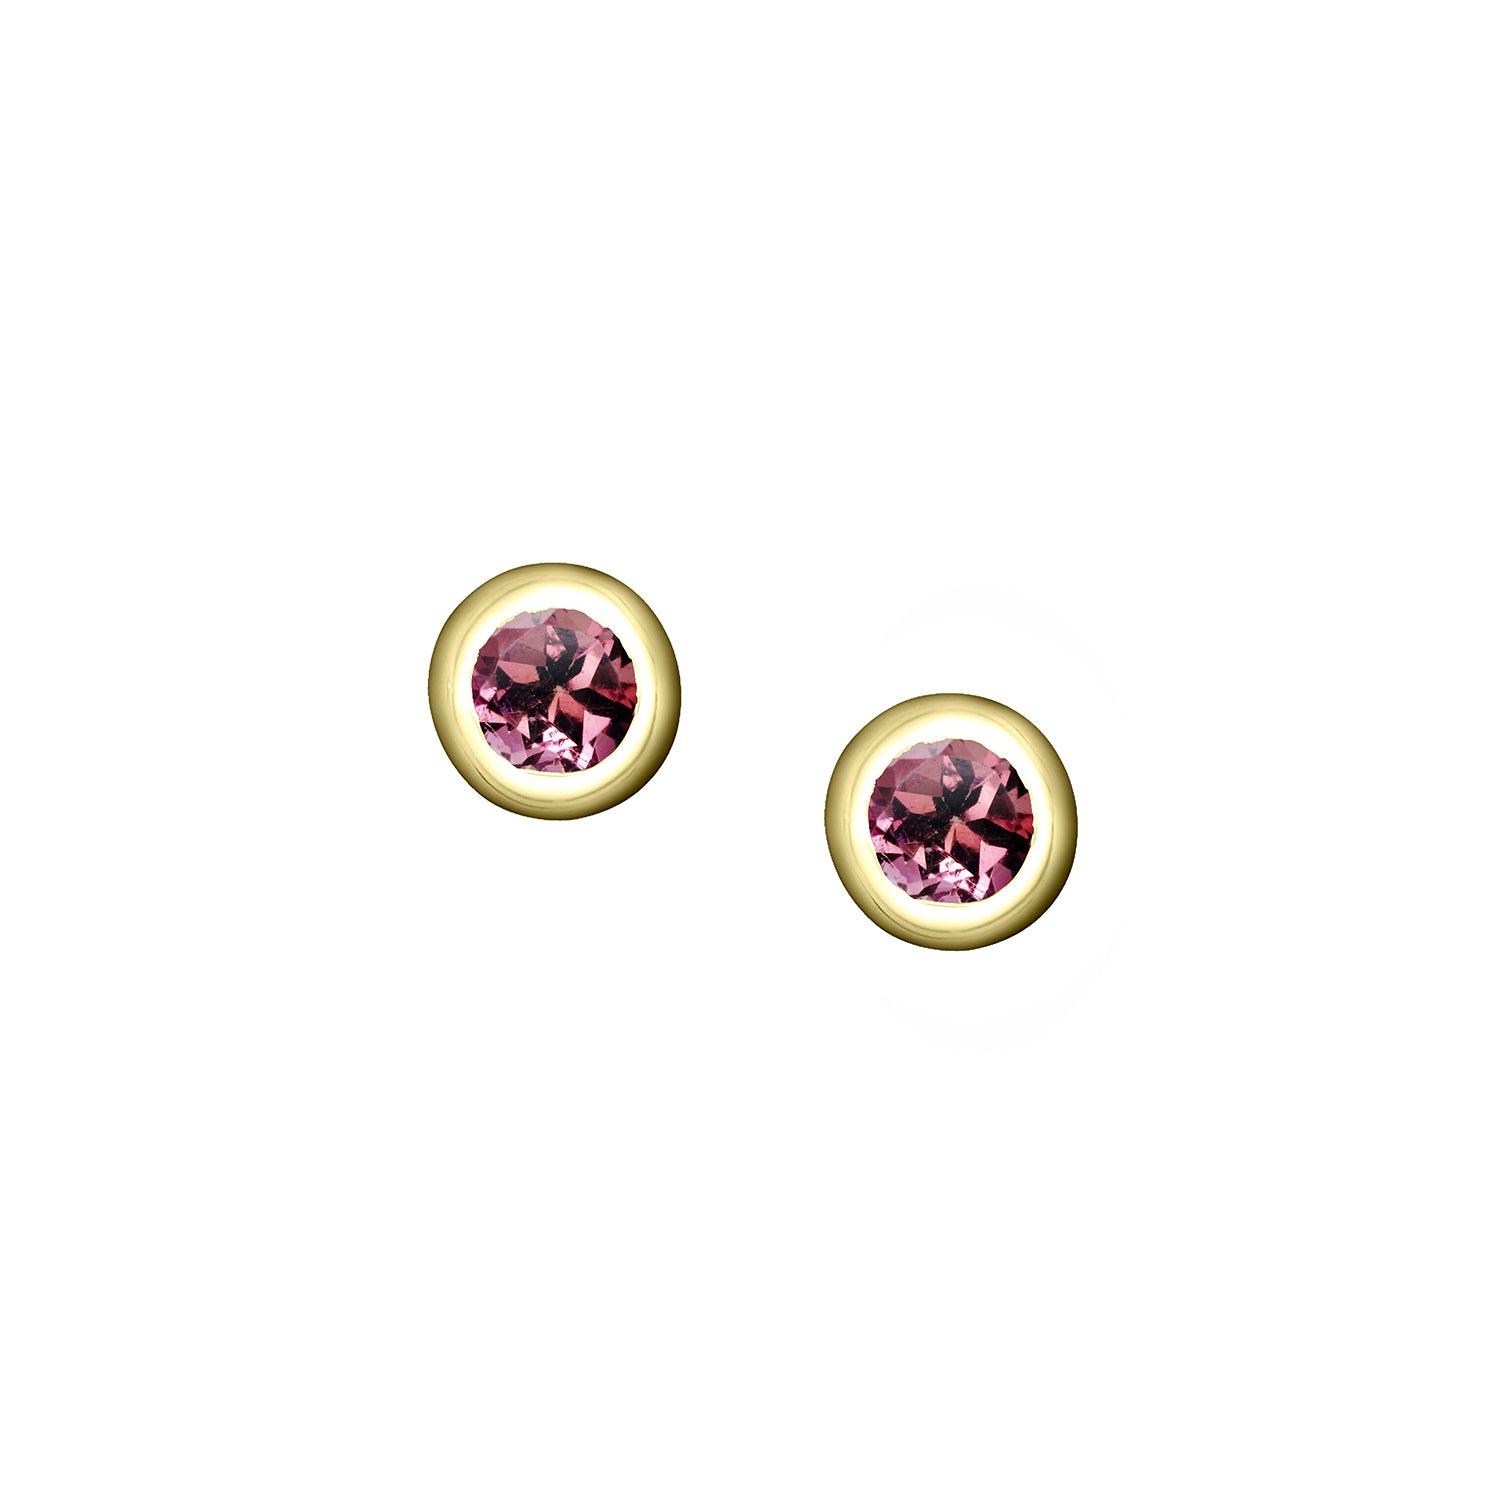 Polished Gold Vermeil Crescent Moon Birthstone Earrings - October / Pink Tourmaline